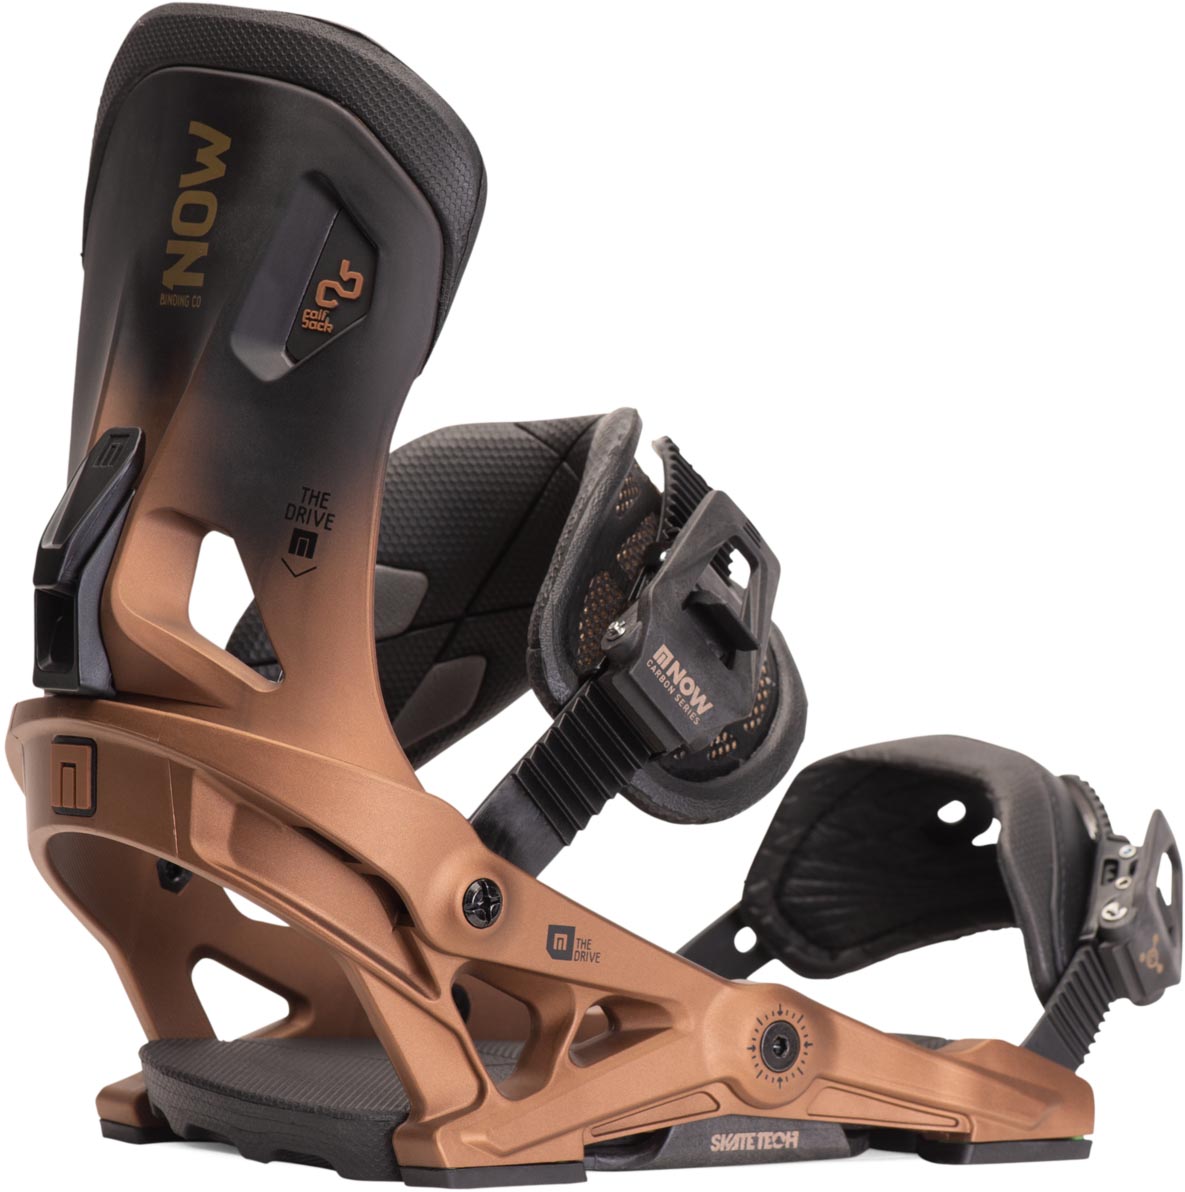 NOW Drive 2014-2022 Snowboard Review - NOW Drive 2014-2022 Snowboard Binding Review The Ride